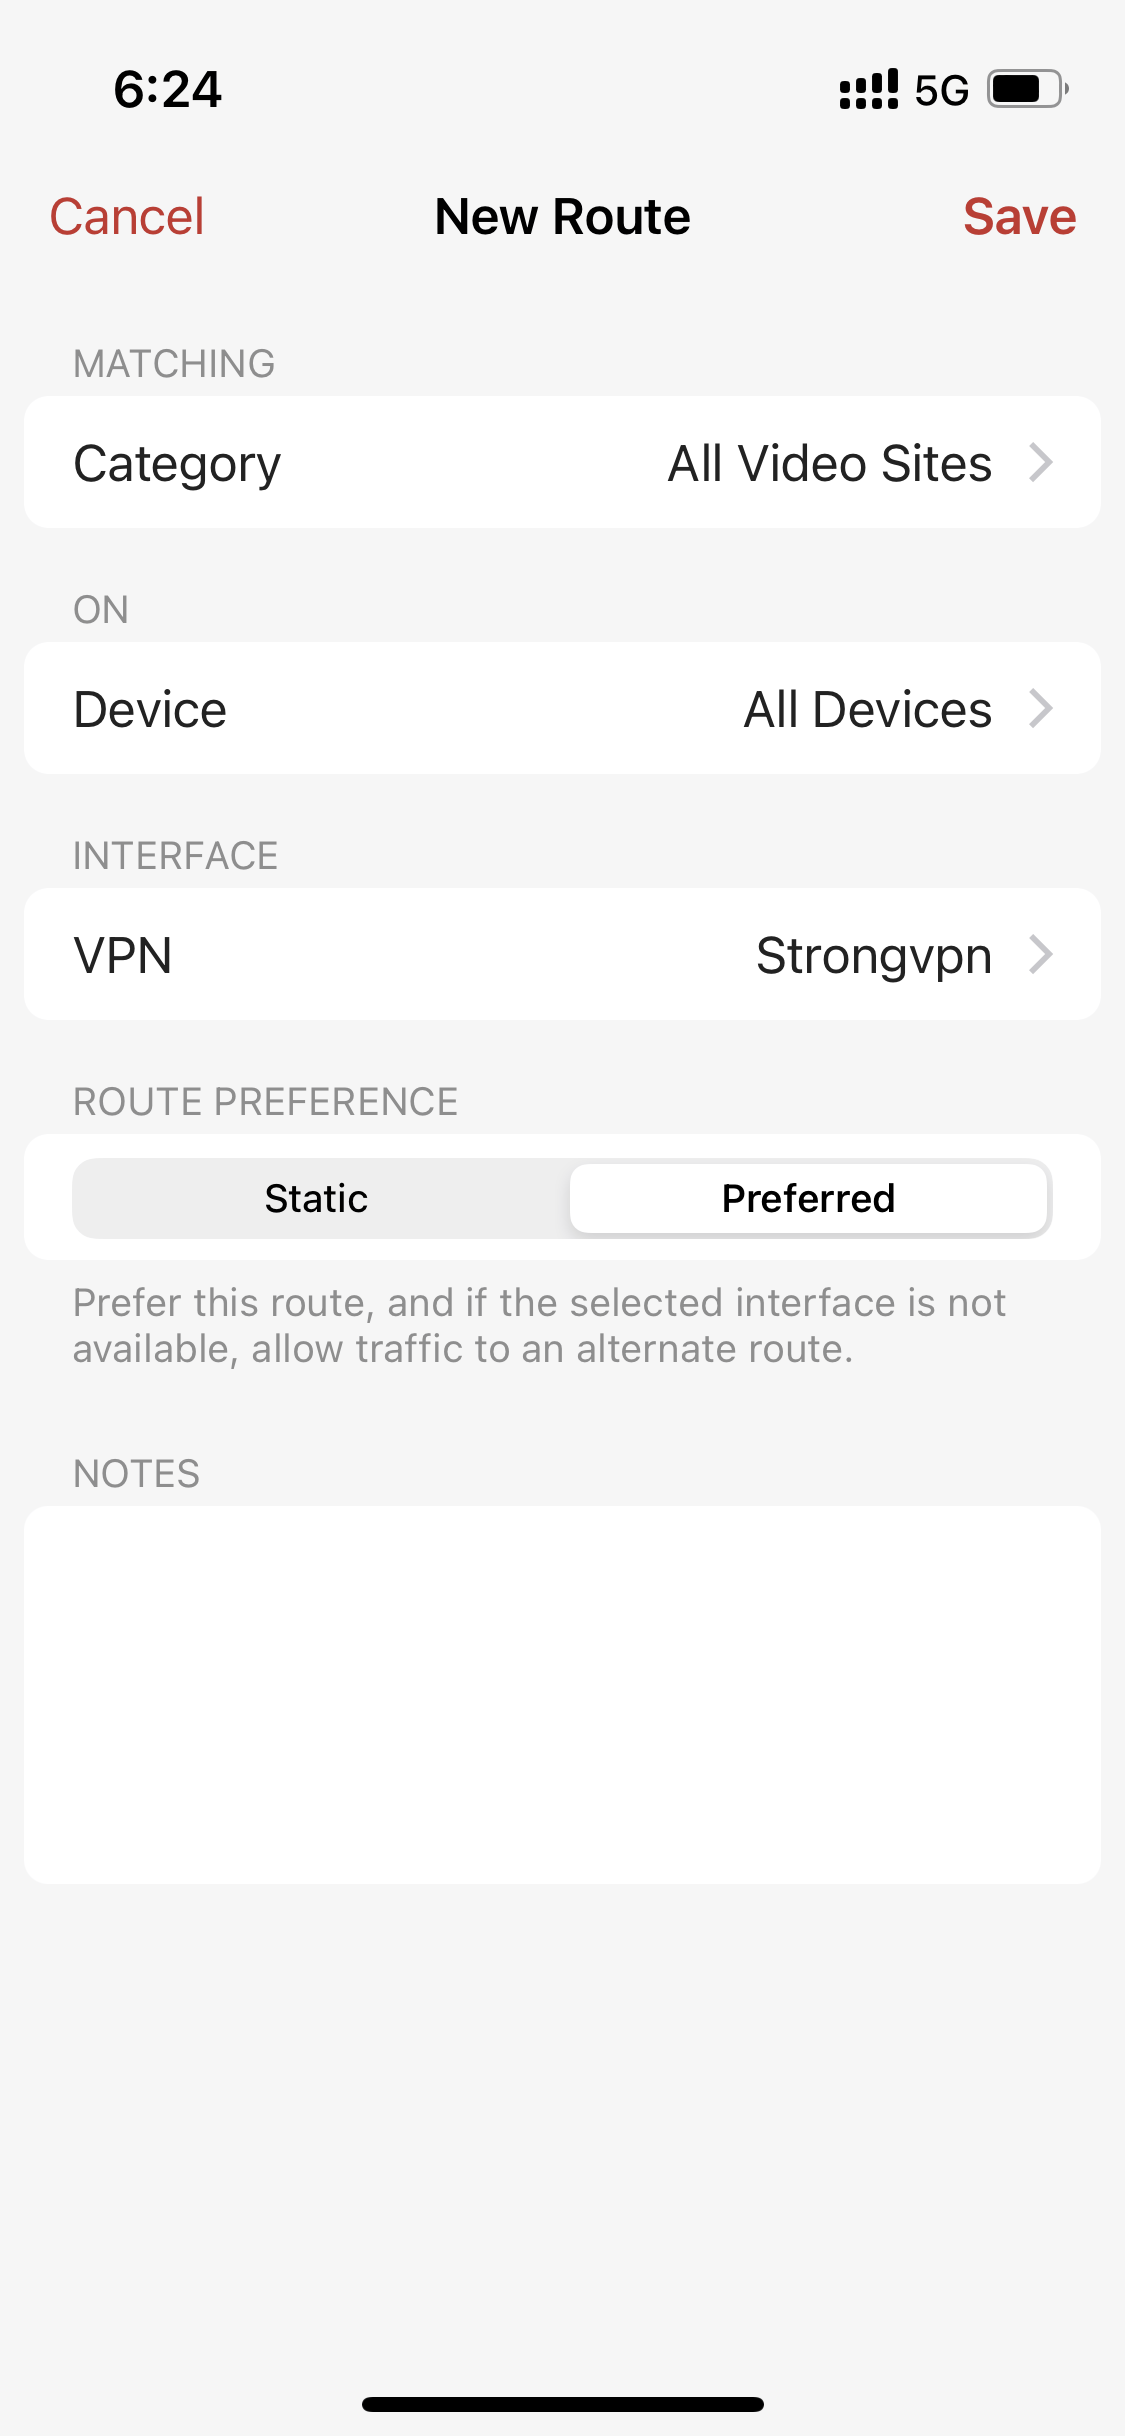 Route device traffic to VPN client, matching all video sites for all devices with chosen VPN service